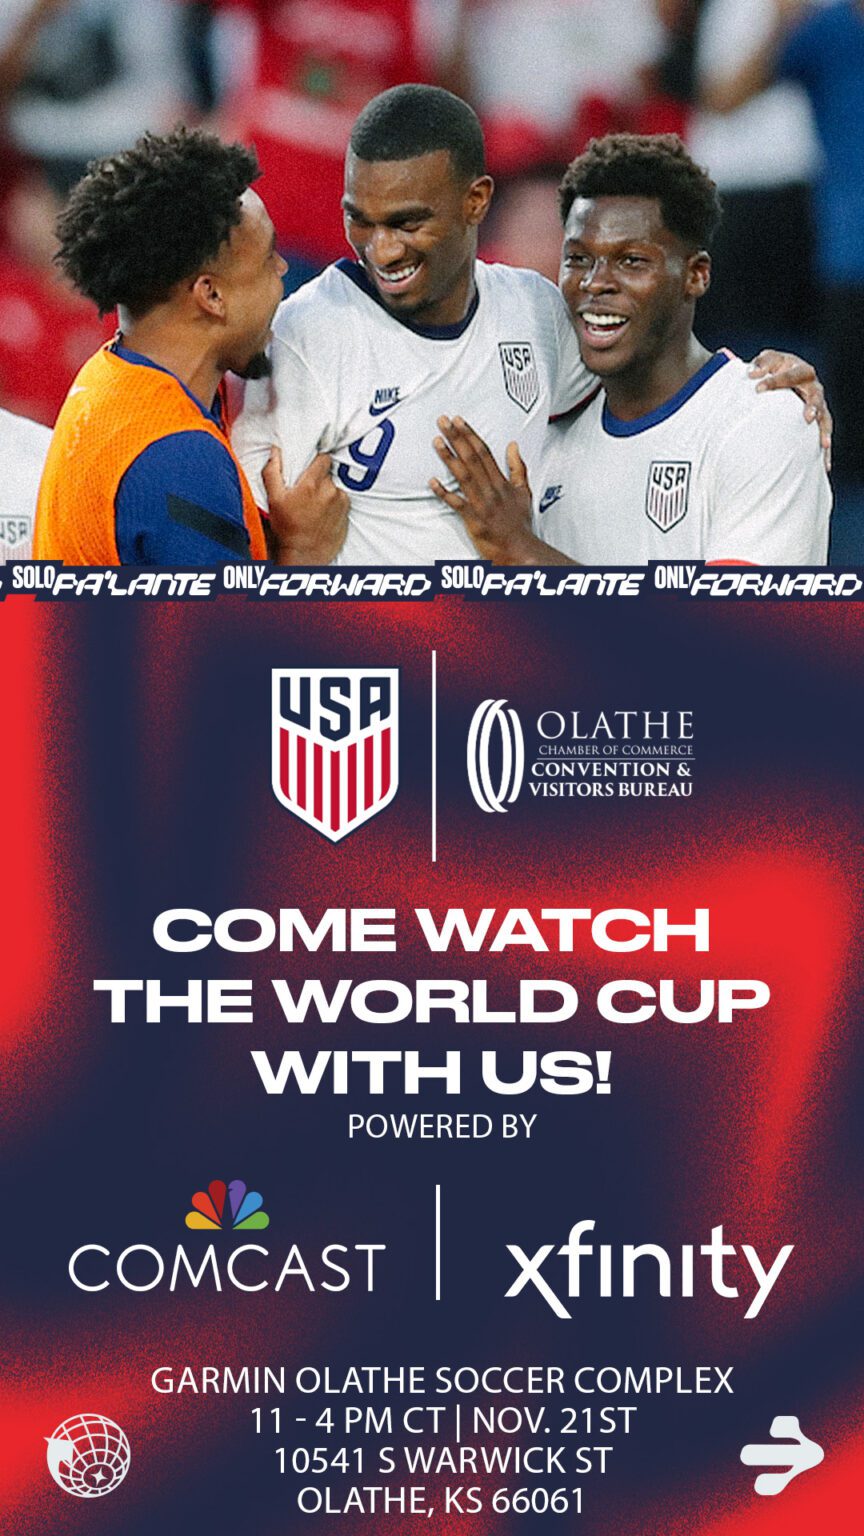 Comcast sponsoring City of Olathe's 2022 official US Soccer World Cup